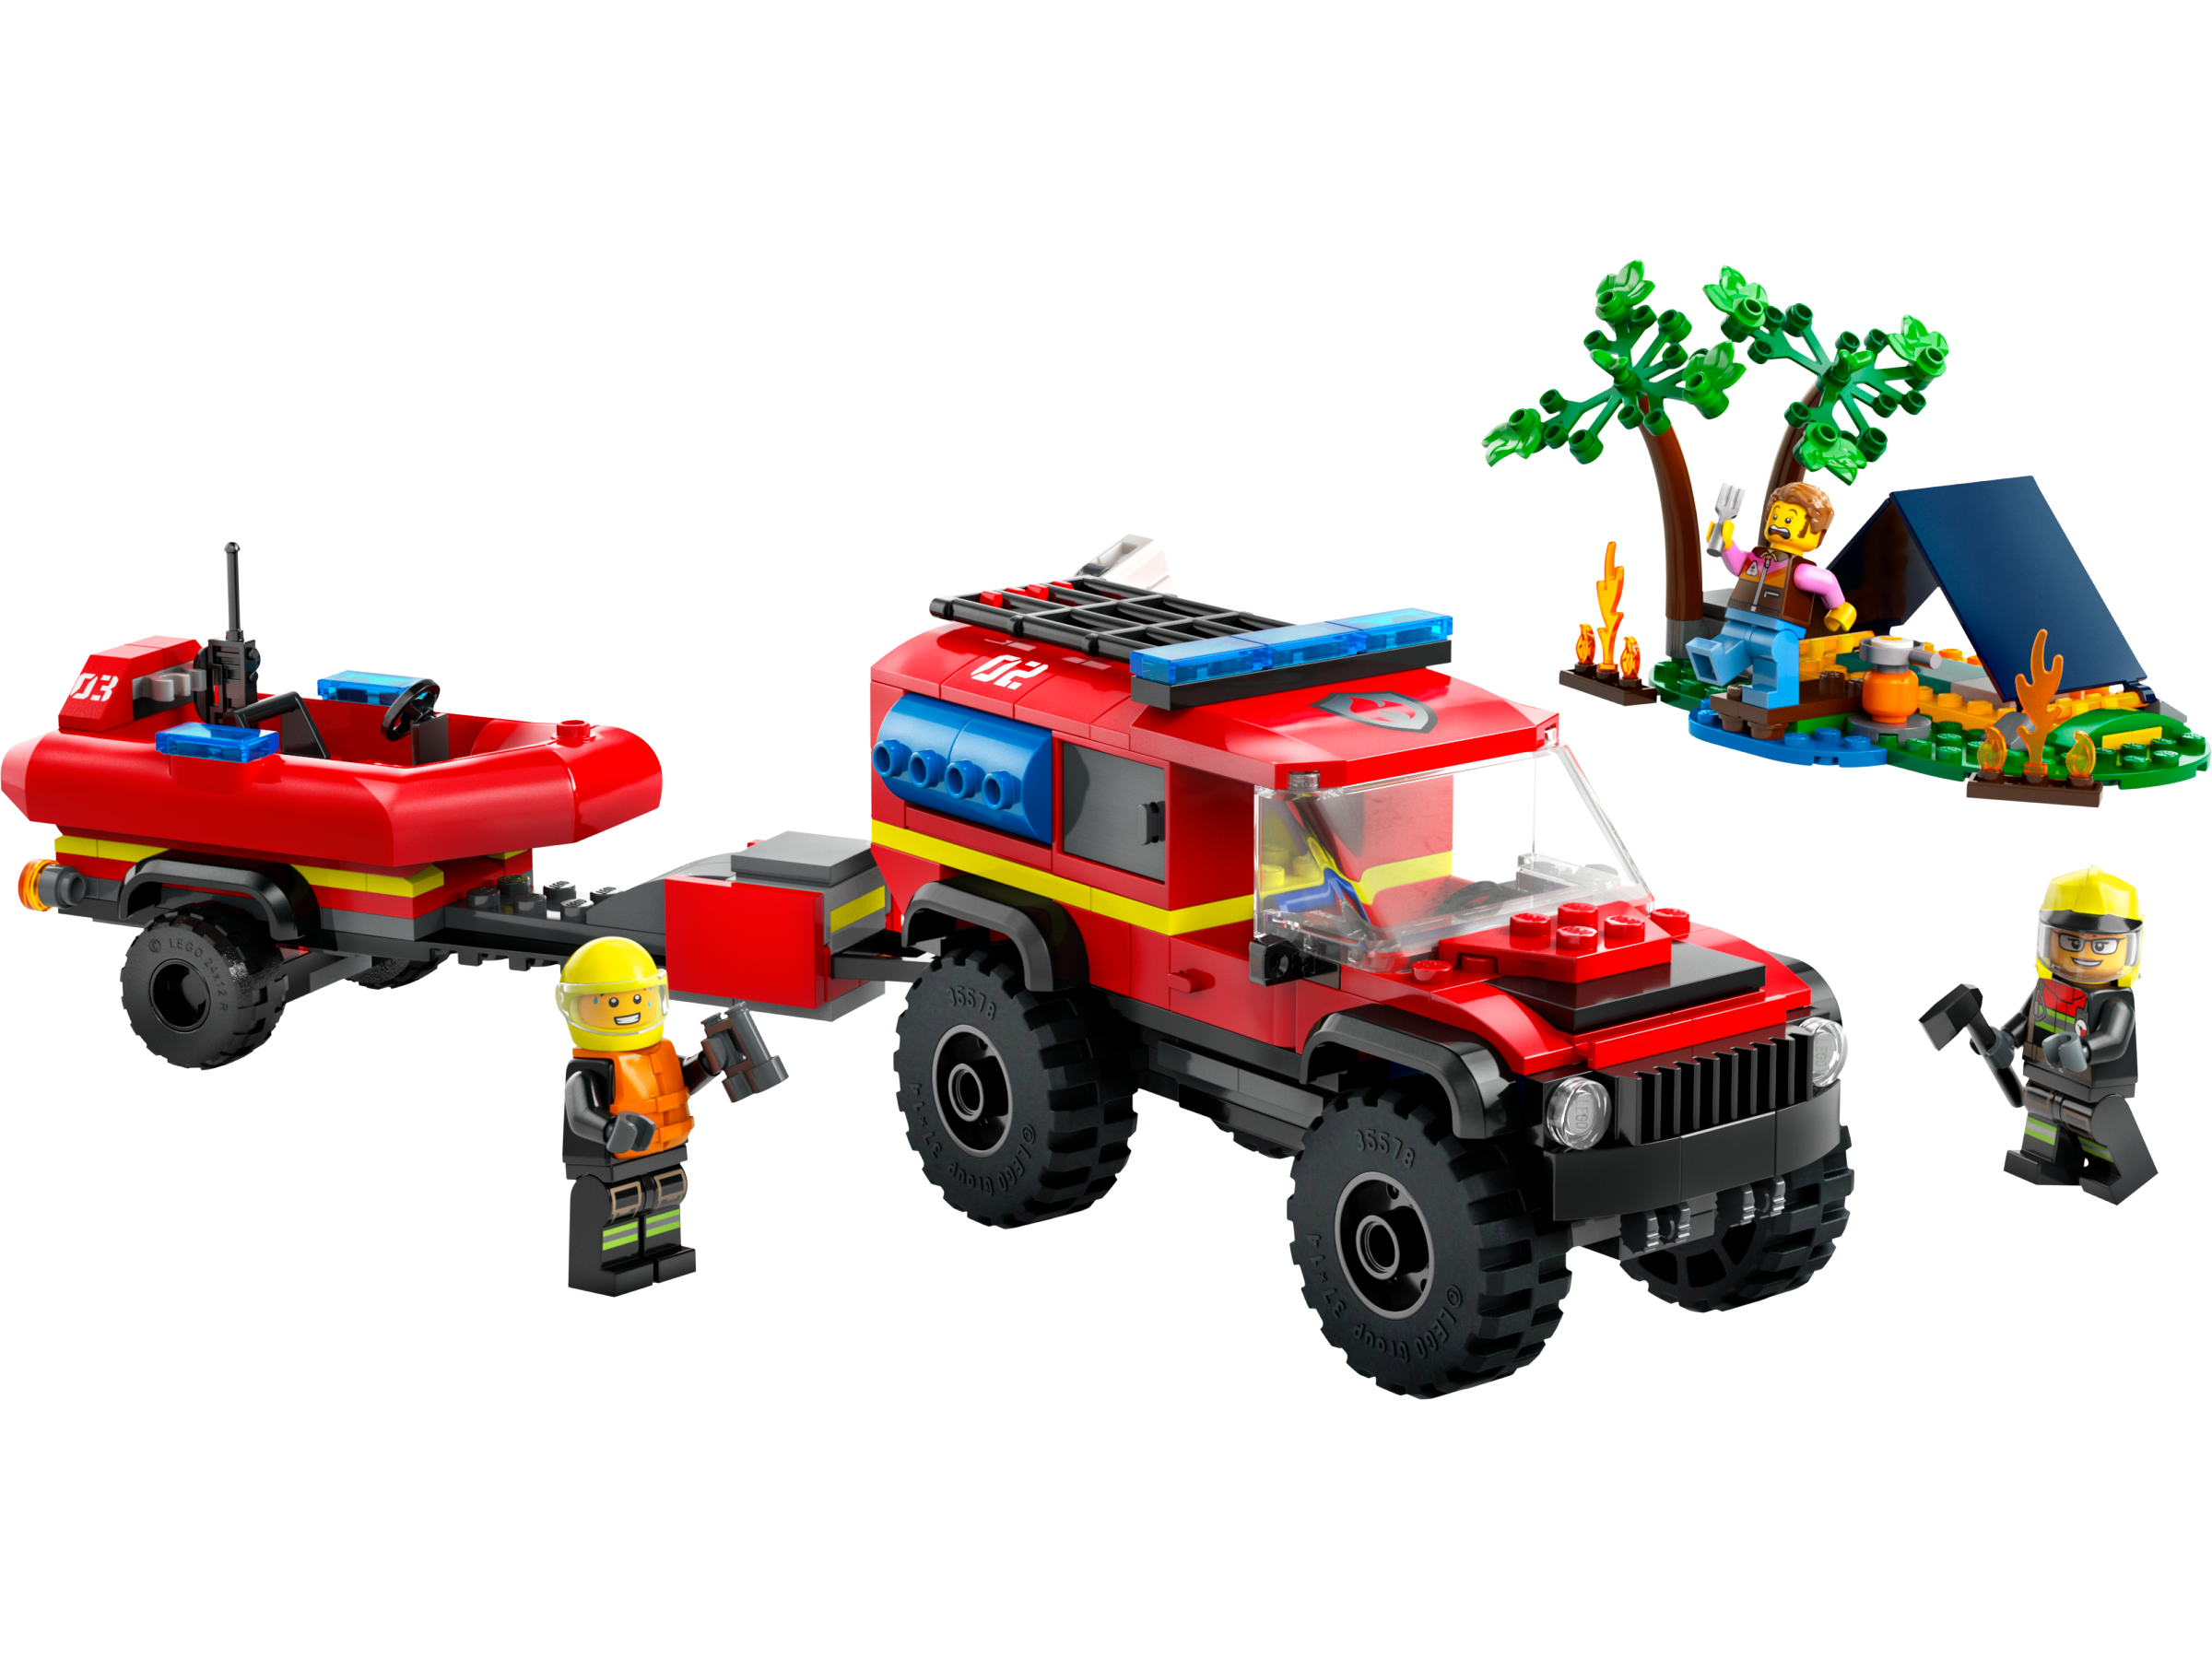 Lego 60412 4x4 Fire Truck with Rescue Boat